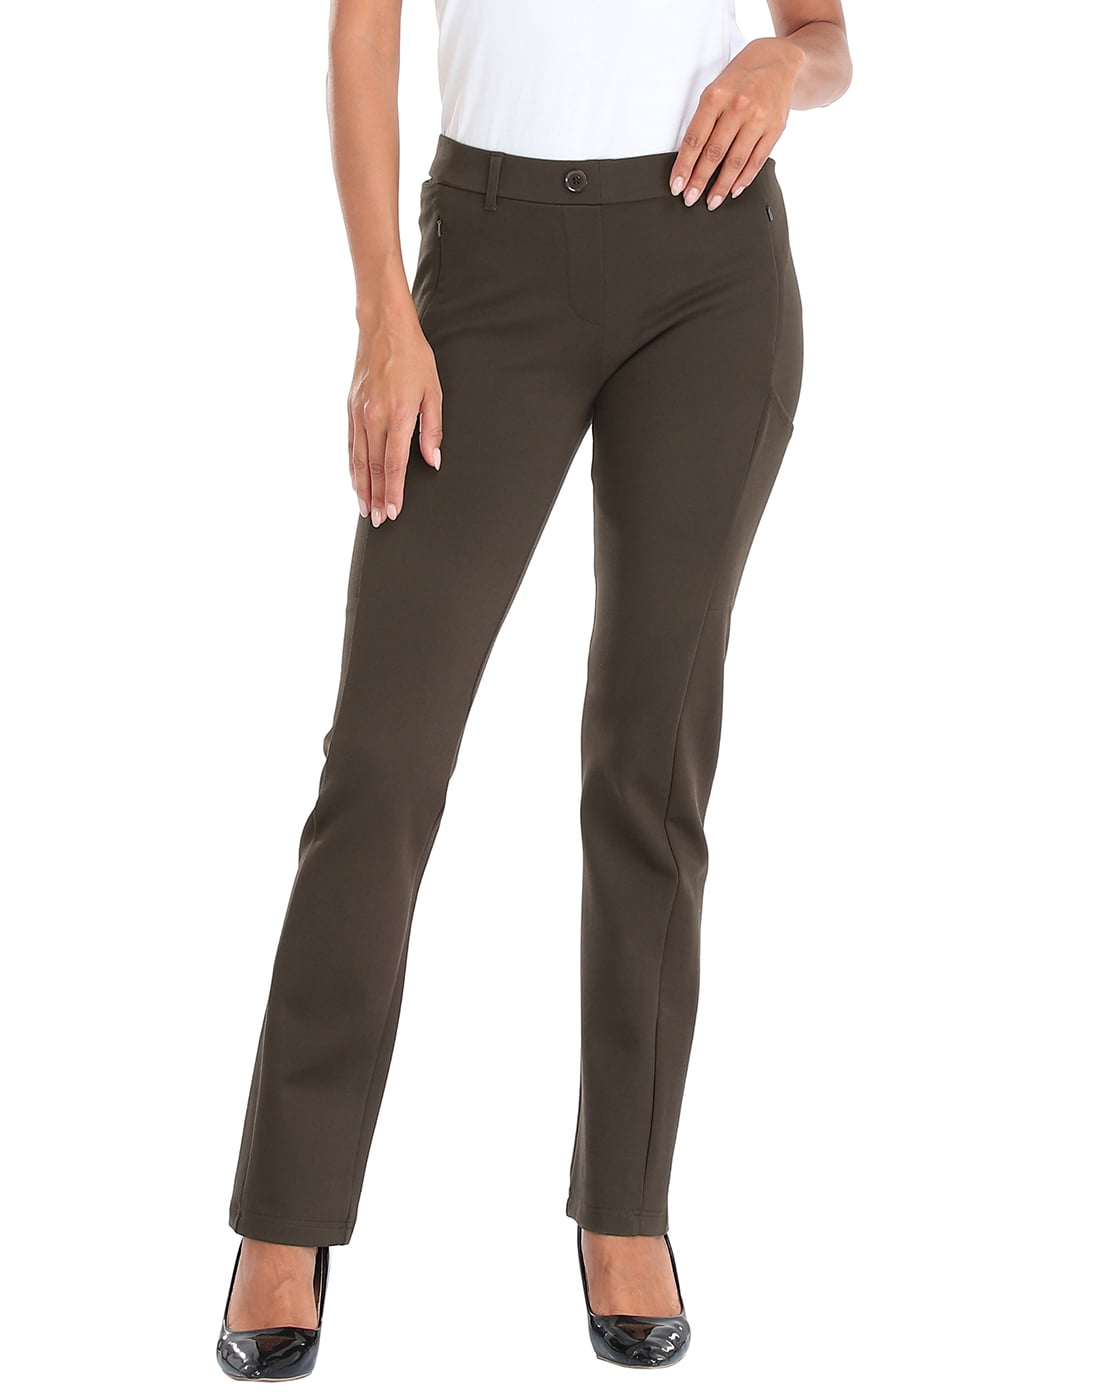 HDE Yoga Dress Pants for Women Straight Leg Pull On Pants with 8 Pockets  Brown - XL Regular